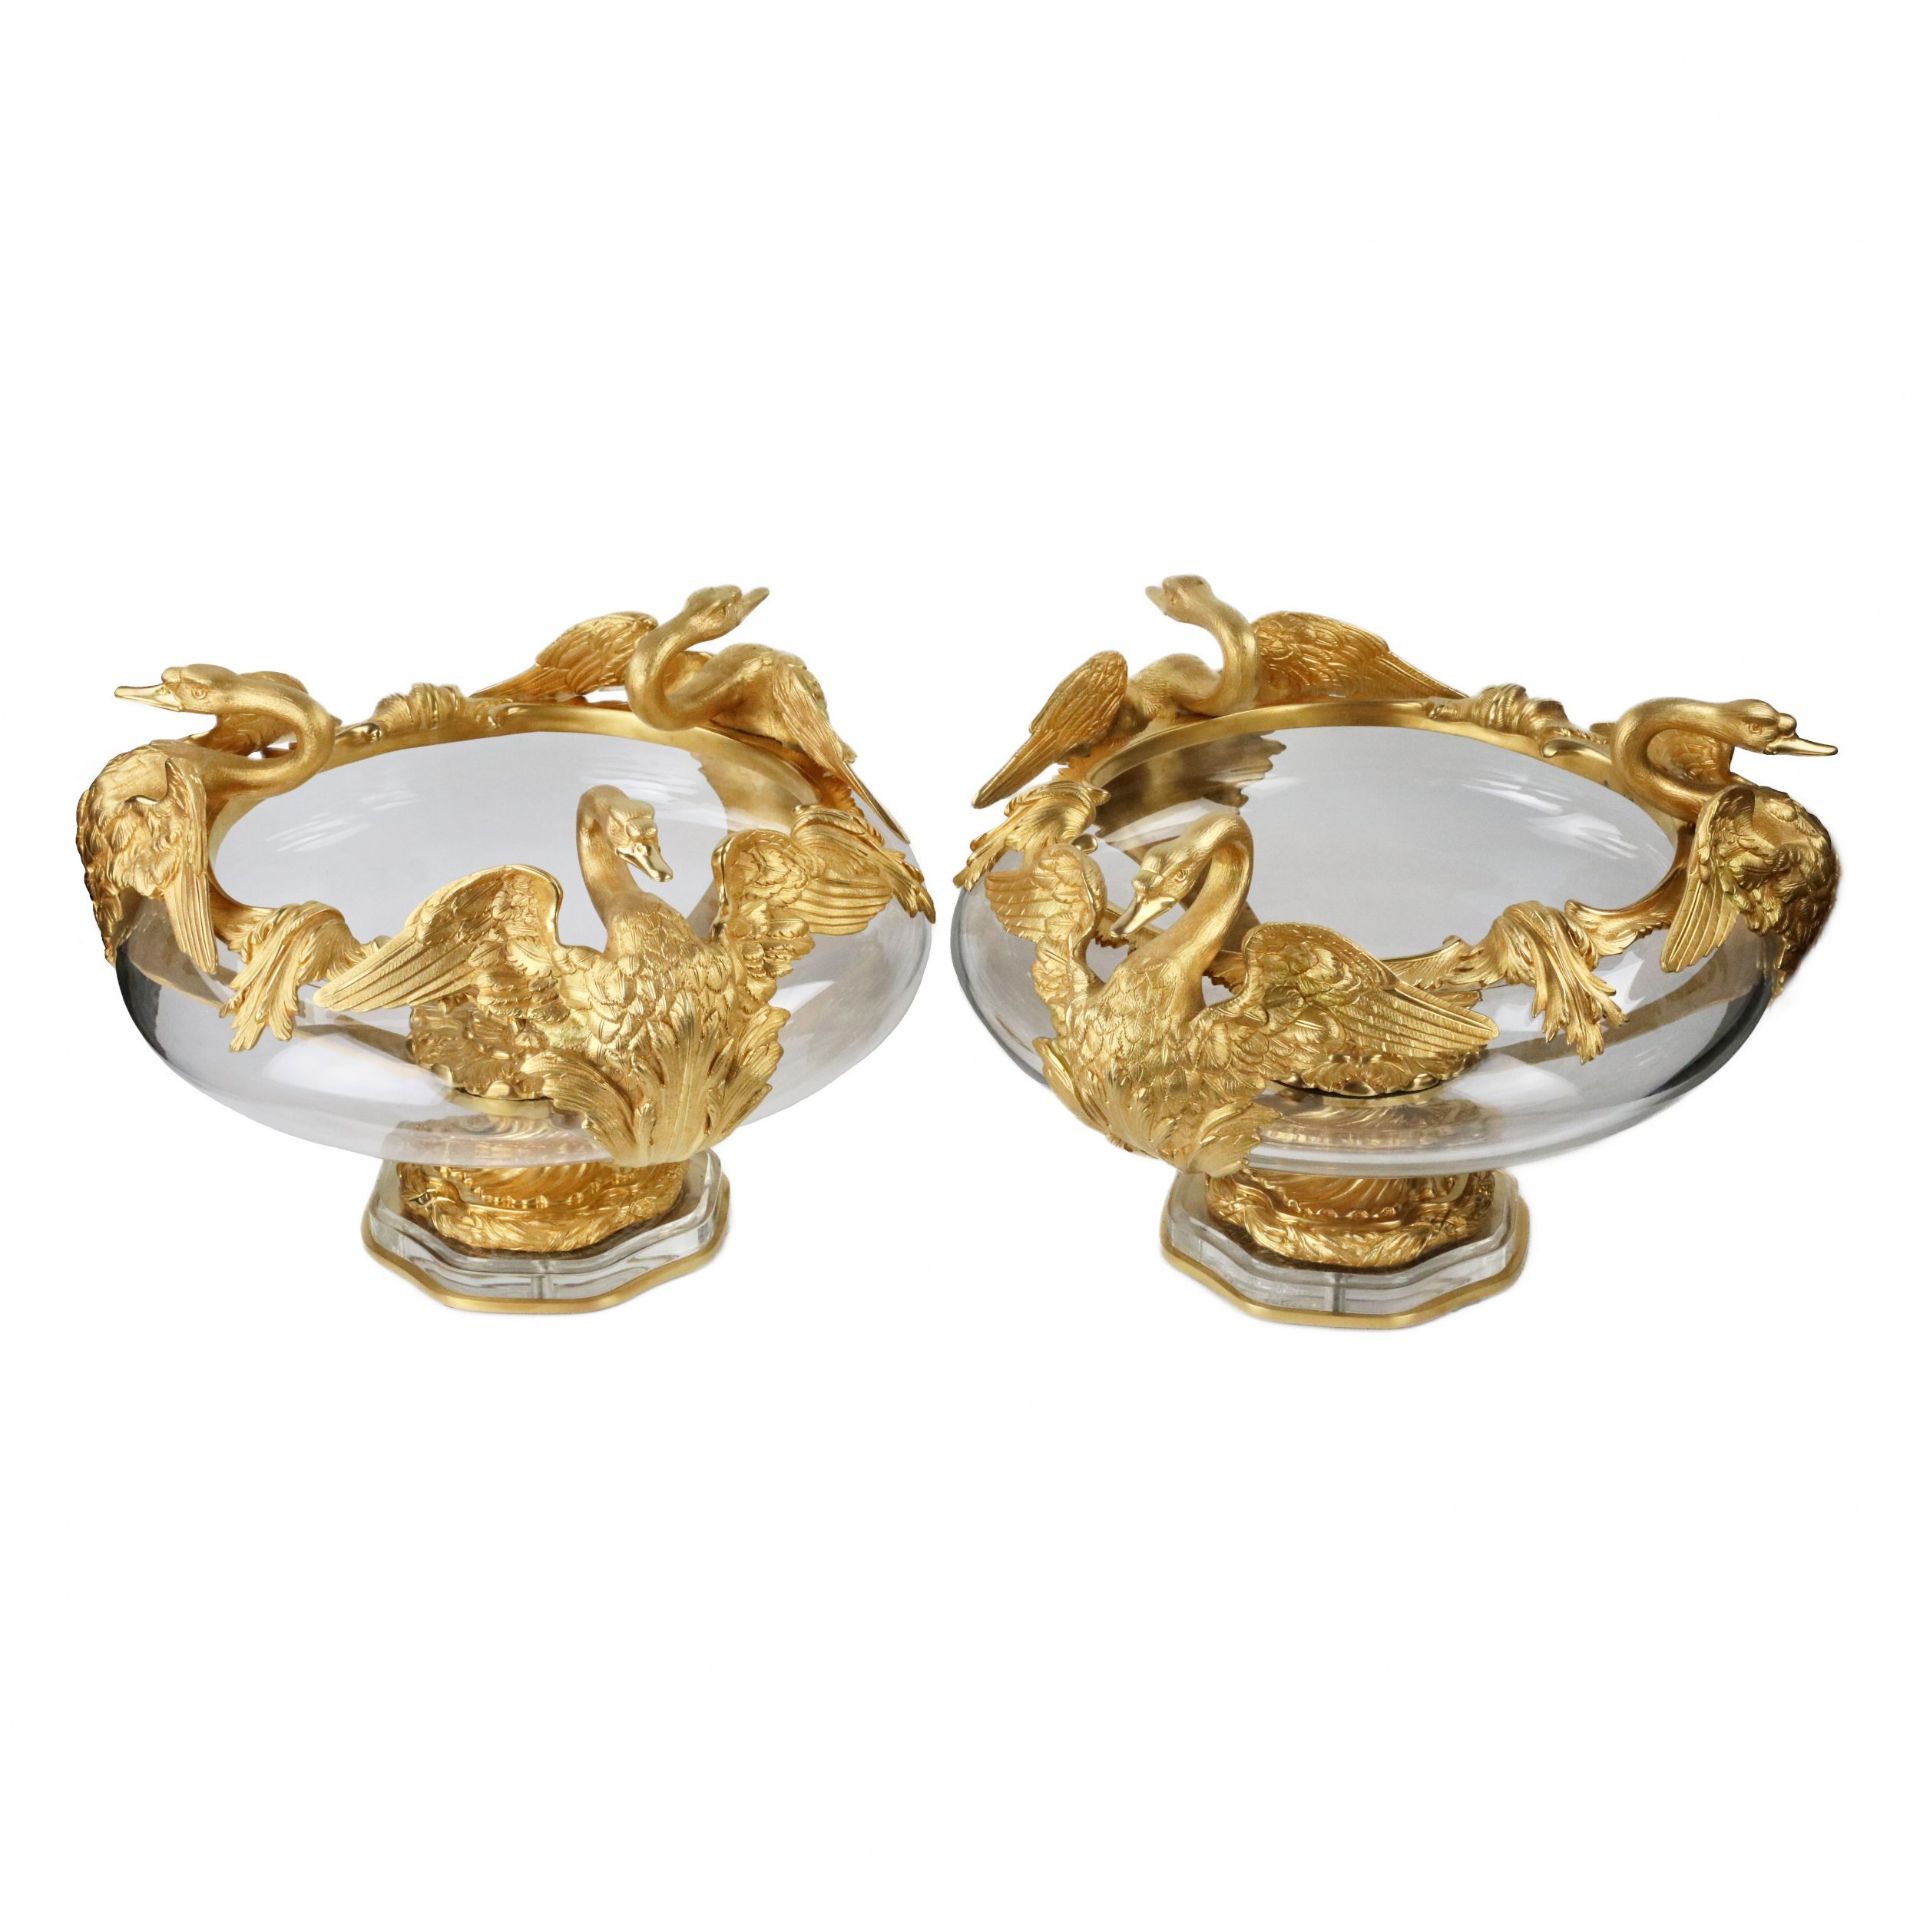 Pair of round vases in cast glass and gilded bronze with swans motif. France 20th century. - Image 4 of 8